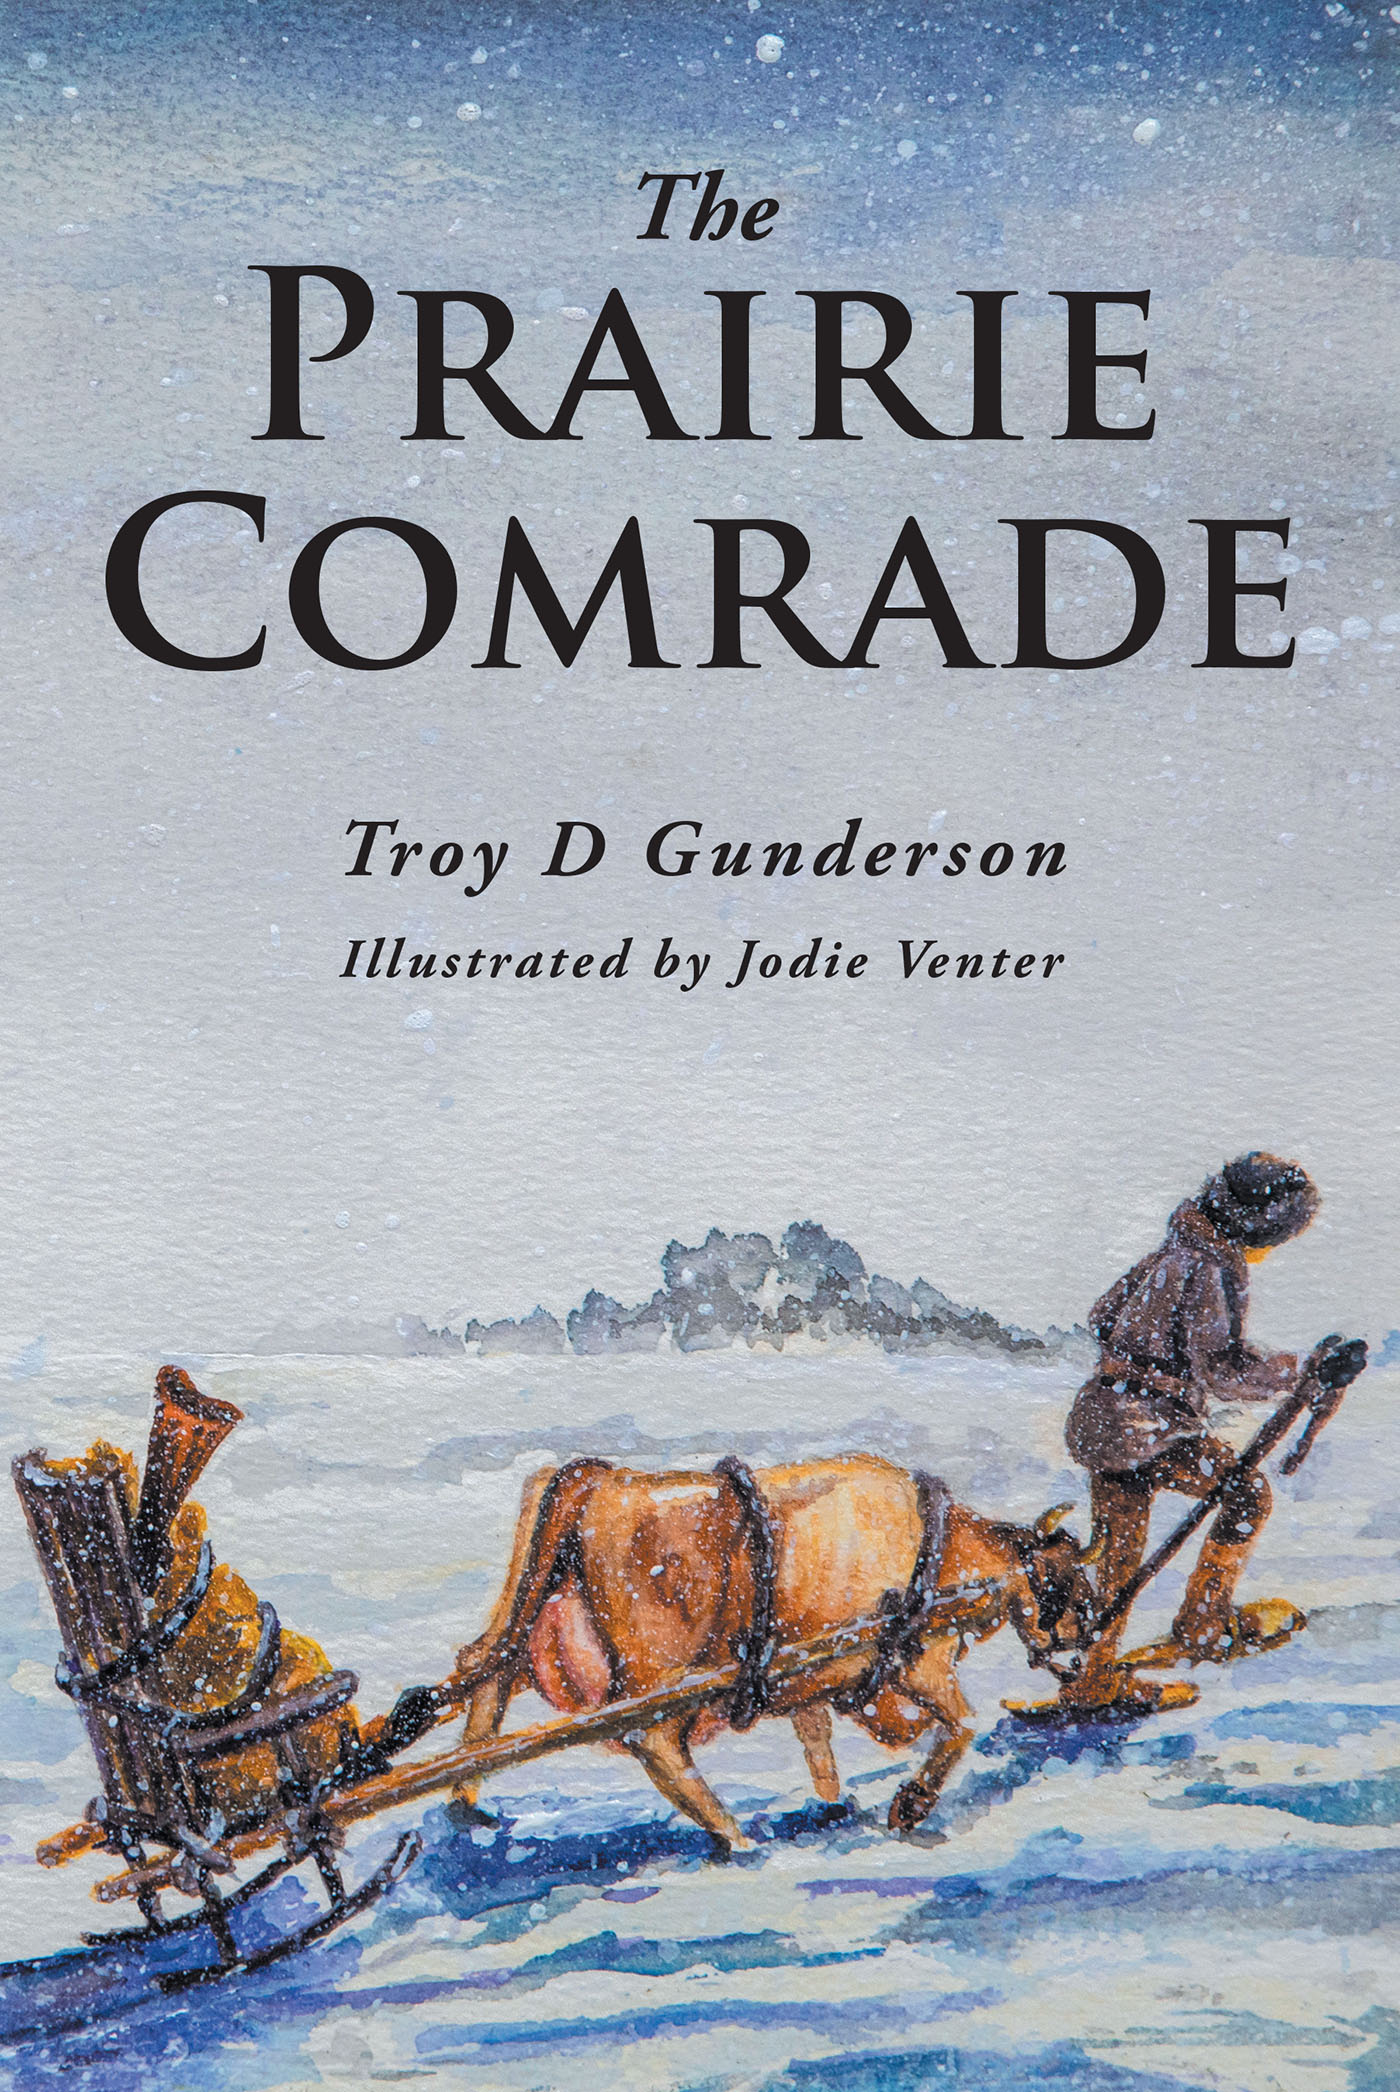 Troy D Gunderson’s Newly Released “The Prairie Comrade” is a Compelling Historical Fiction That Explores Life in the Wilds of North Dakota